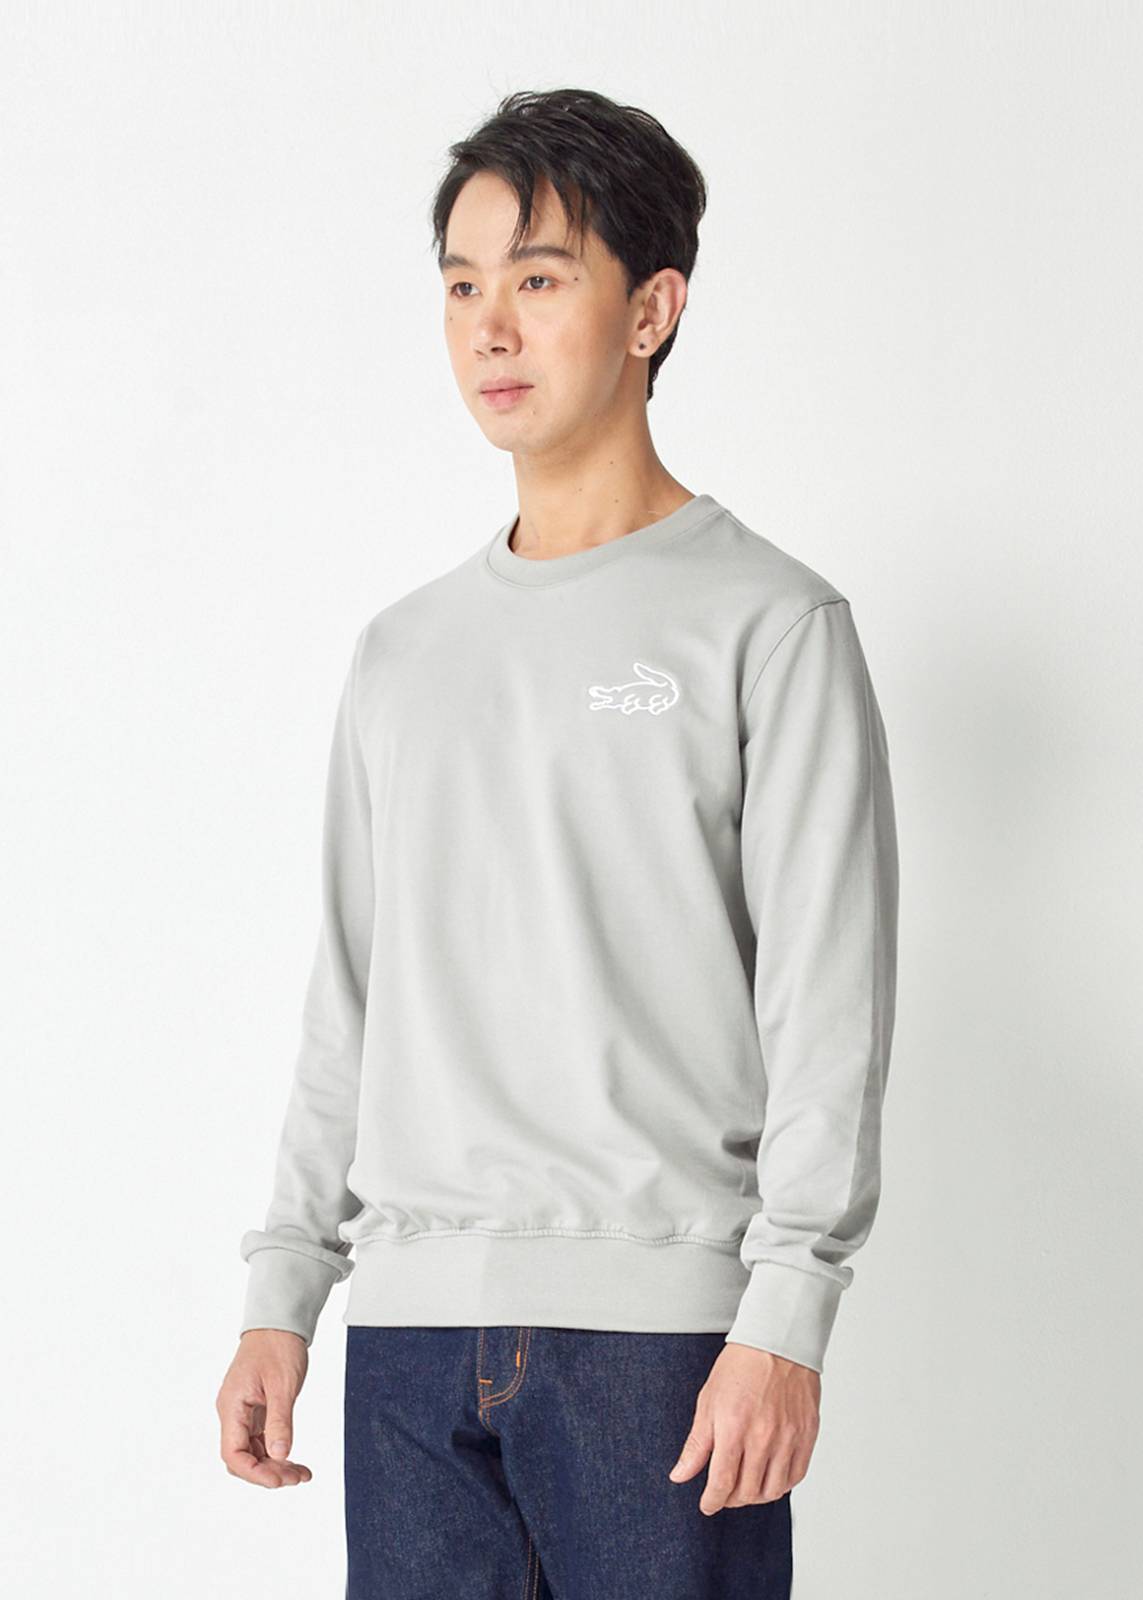 GRAY JUMPER CUSTOM FIT WITH EMBROIDERED LOGO